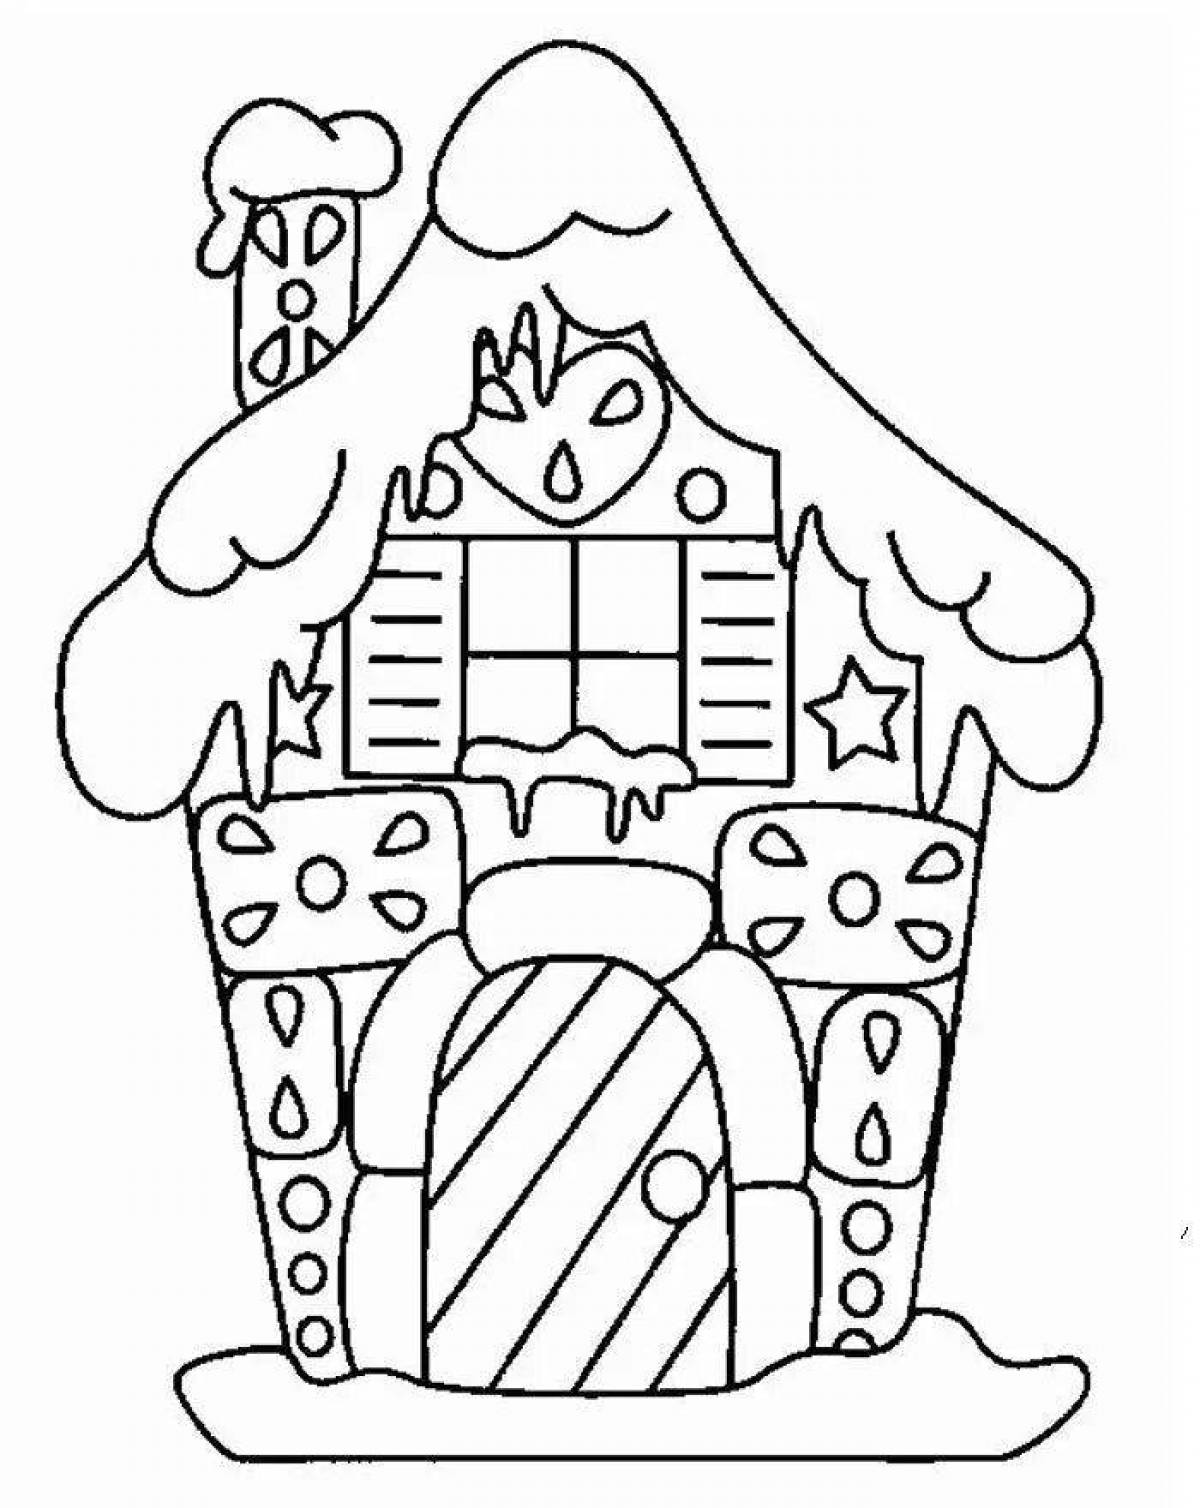 Awesome washcloth and ice hut coloring page